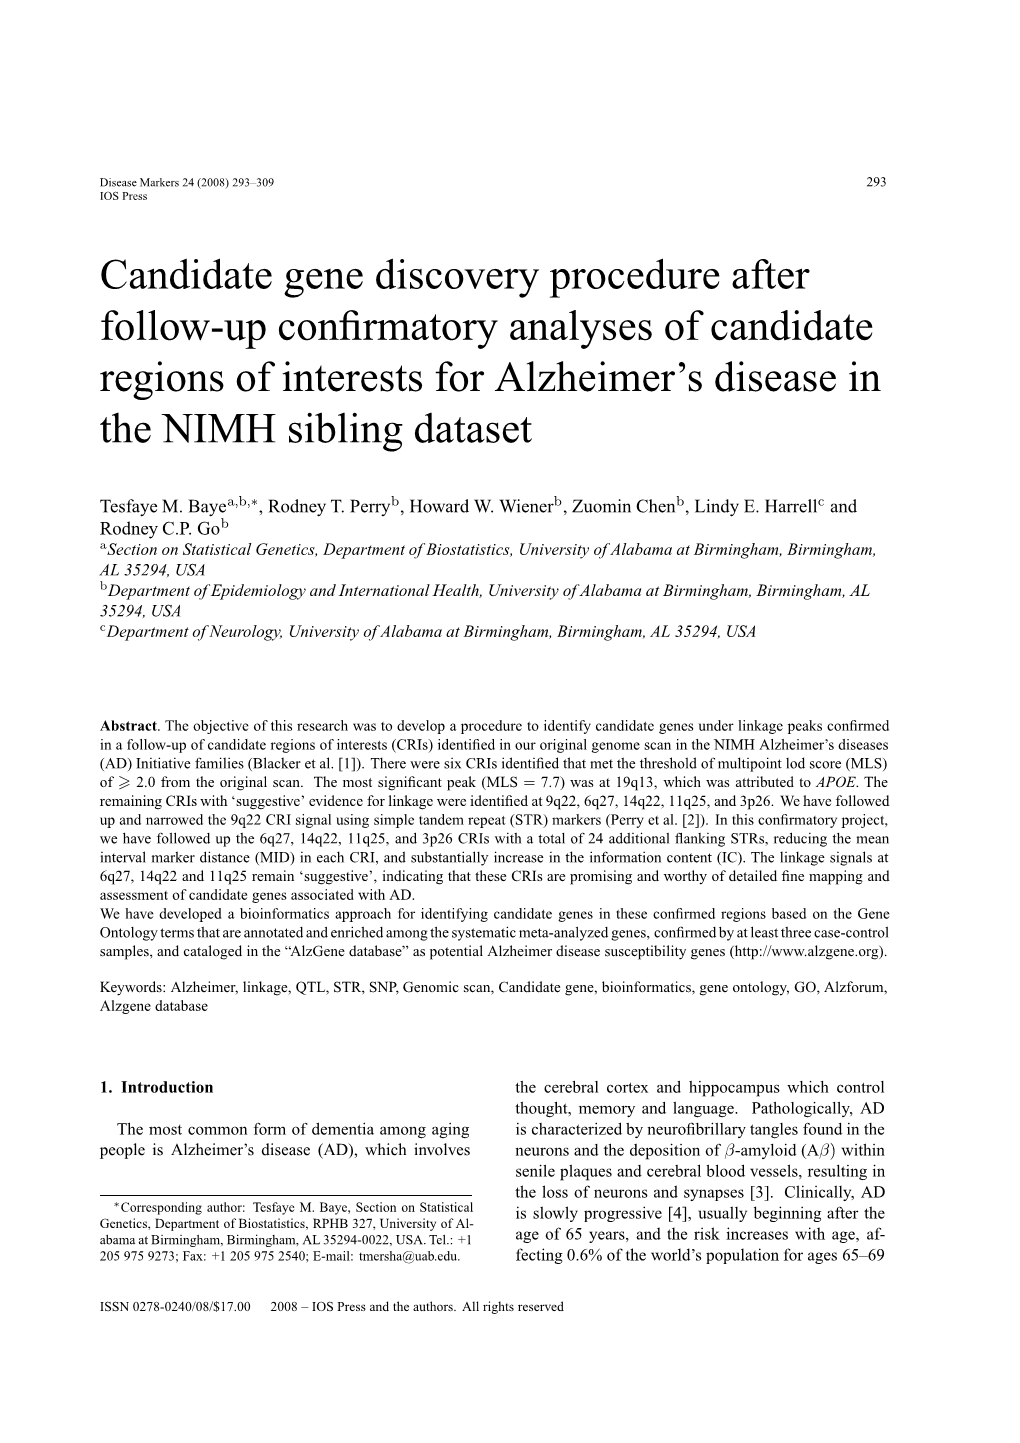 Candidate Gene Discovery Procedure After Follow-Up Conﬁrmatory Analyses of Candidate Regions of Interests for Alzheimer’S Disease in the NIMH Sibling Dataset